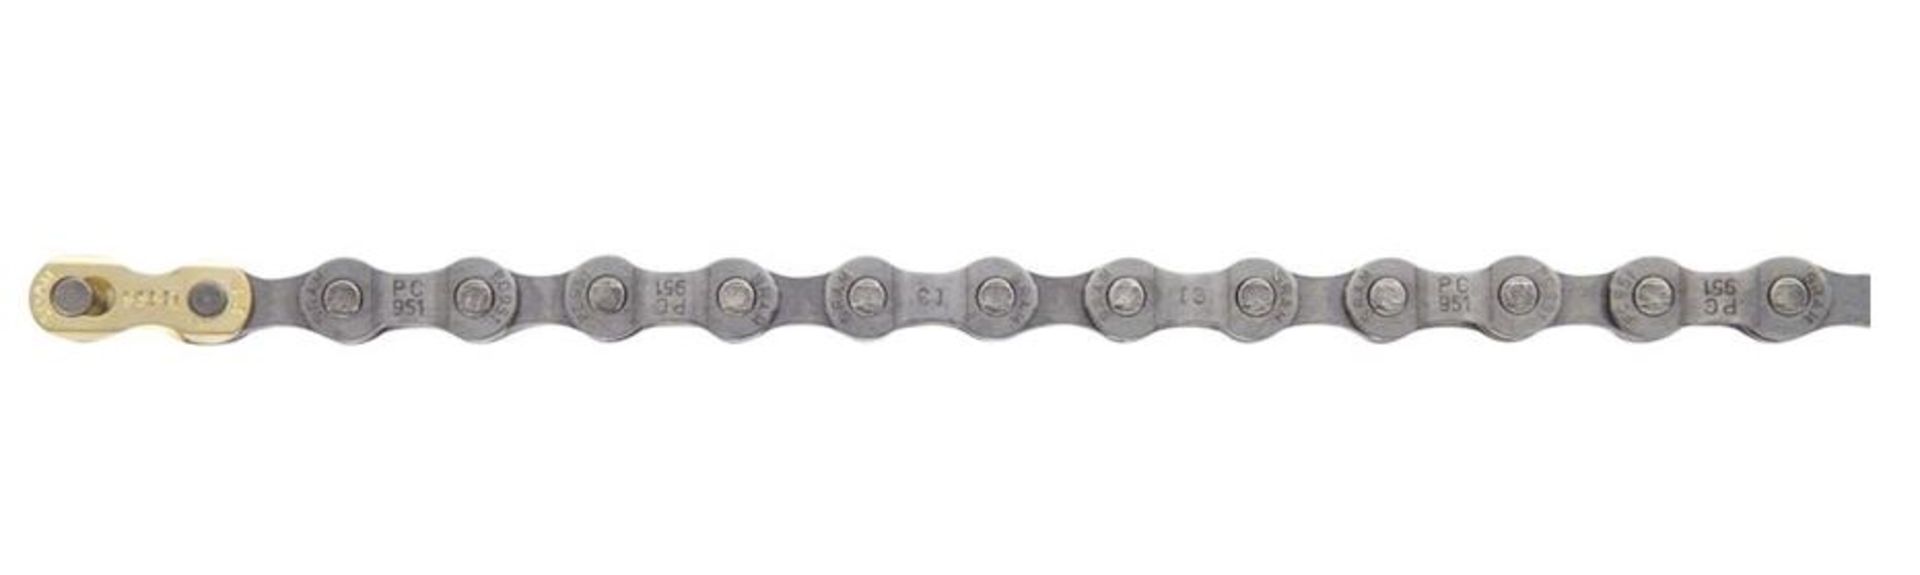 5 x SRAM PC-951 9 speed Chain with Powerlink, 114 Links - Image 2 of 6